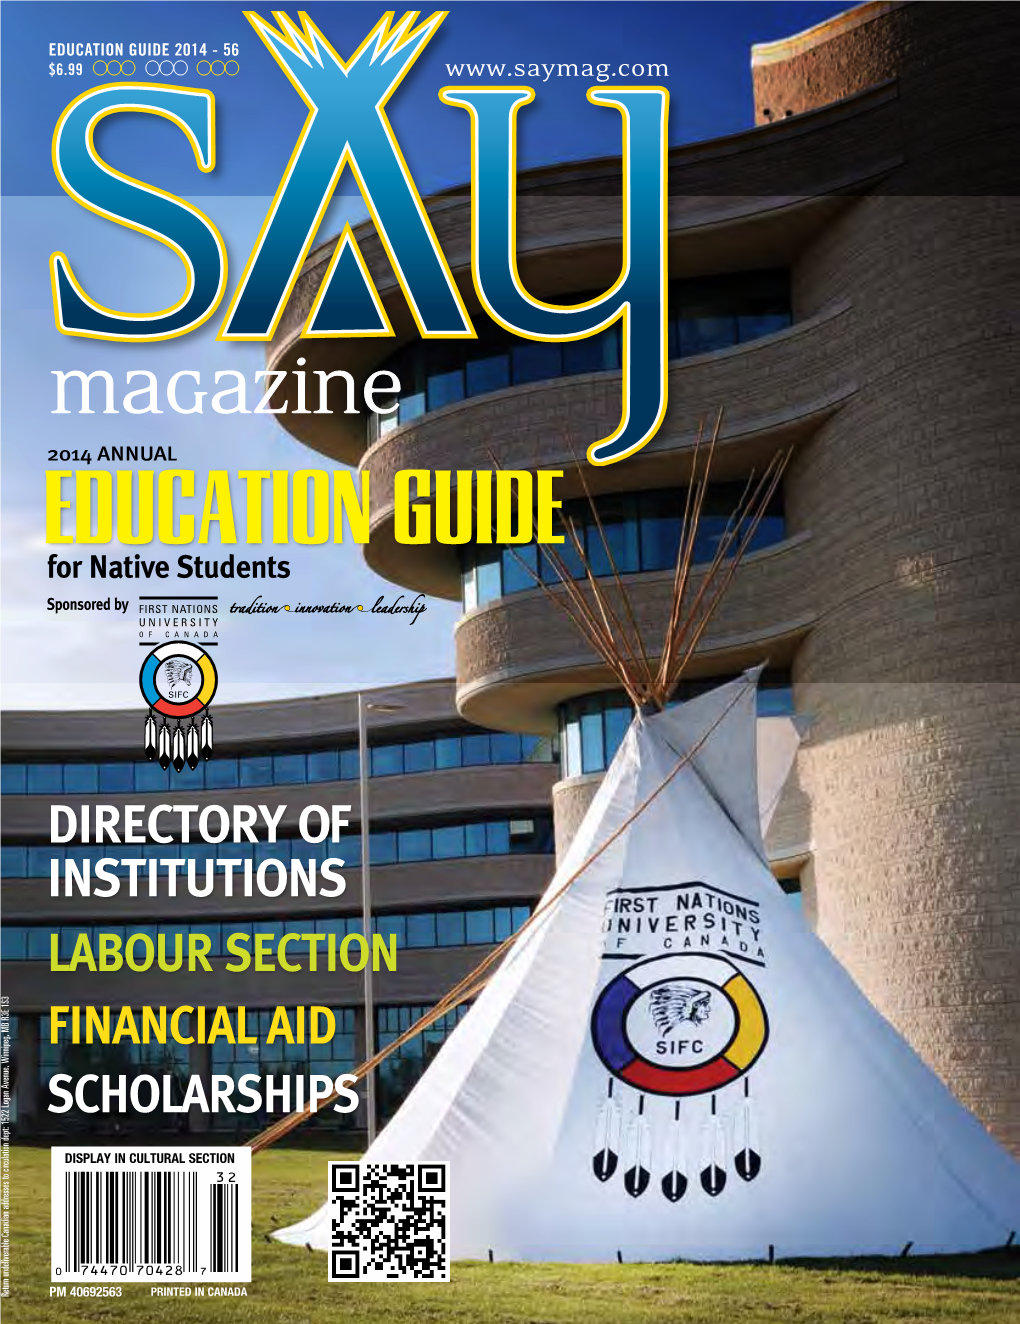 Free Sample of 2014 Education Guide